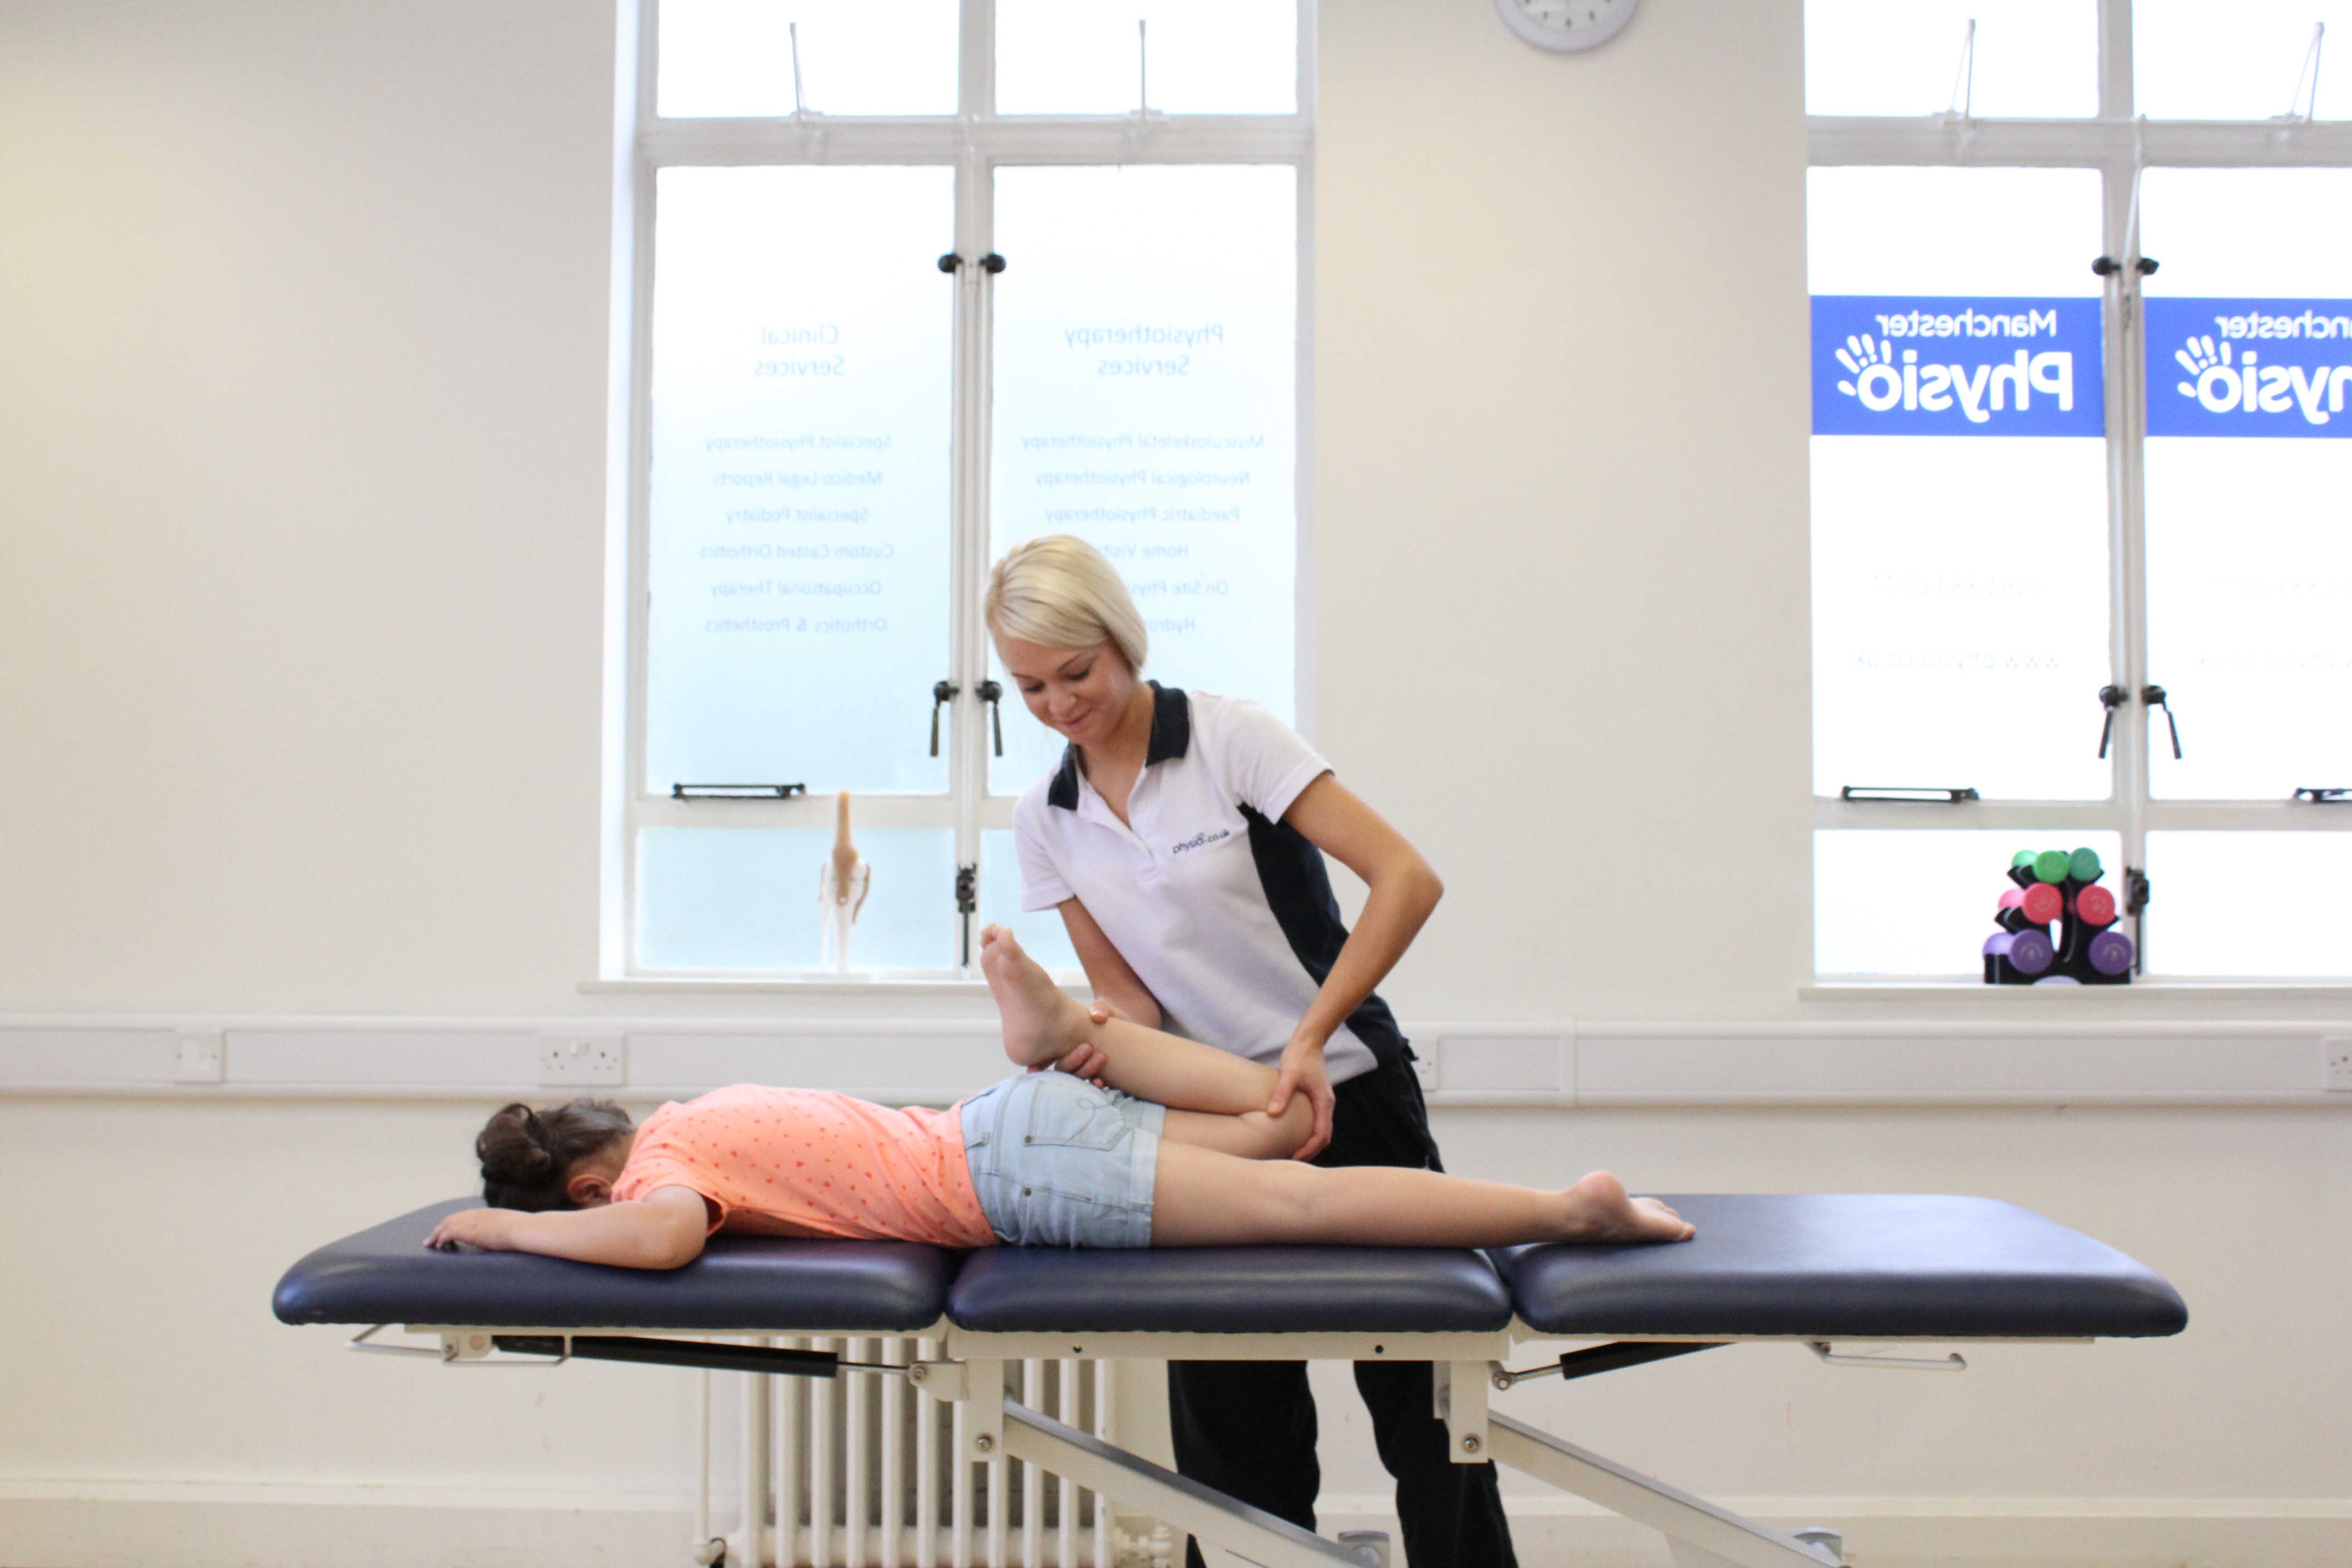 Toning and strengthening exercises assisted by specilaist paediatric physiotherapist